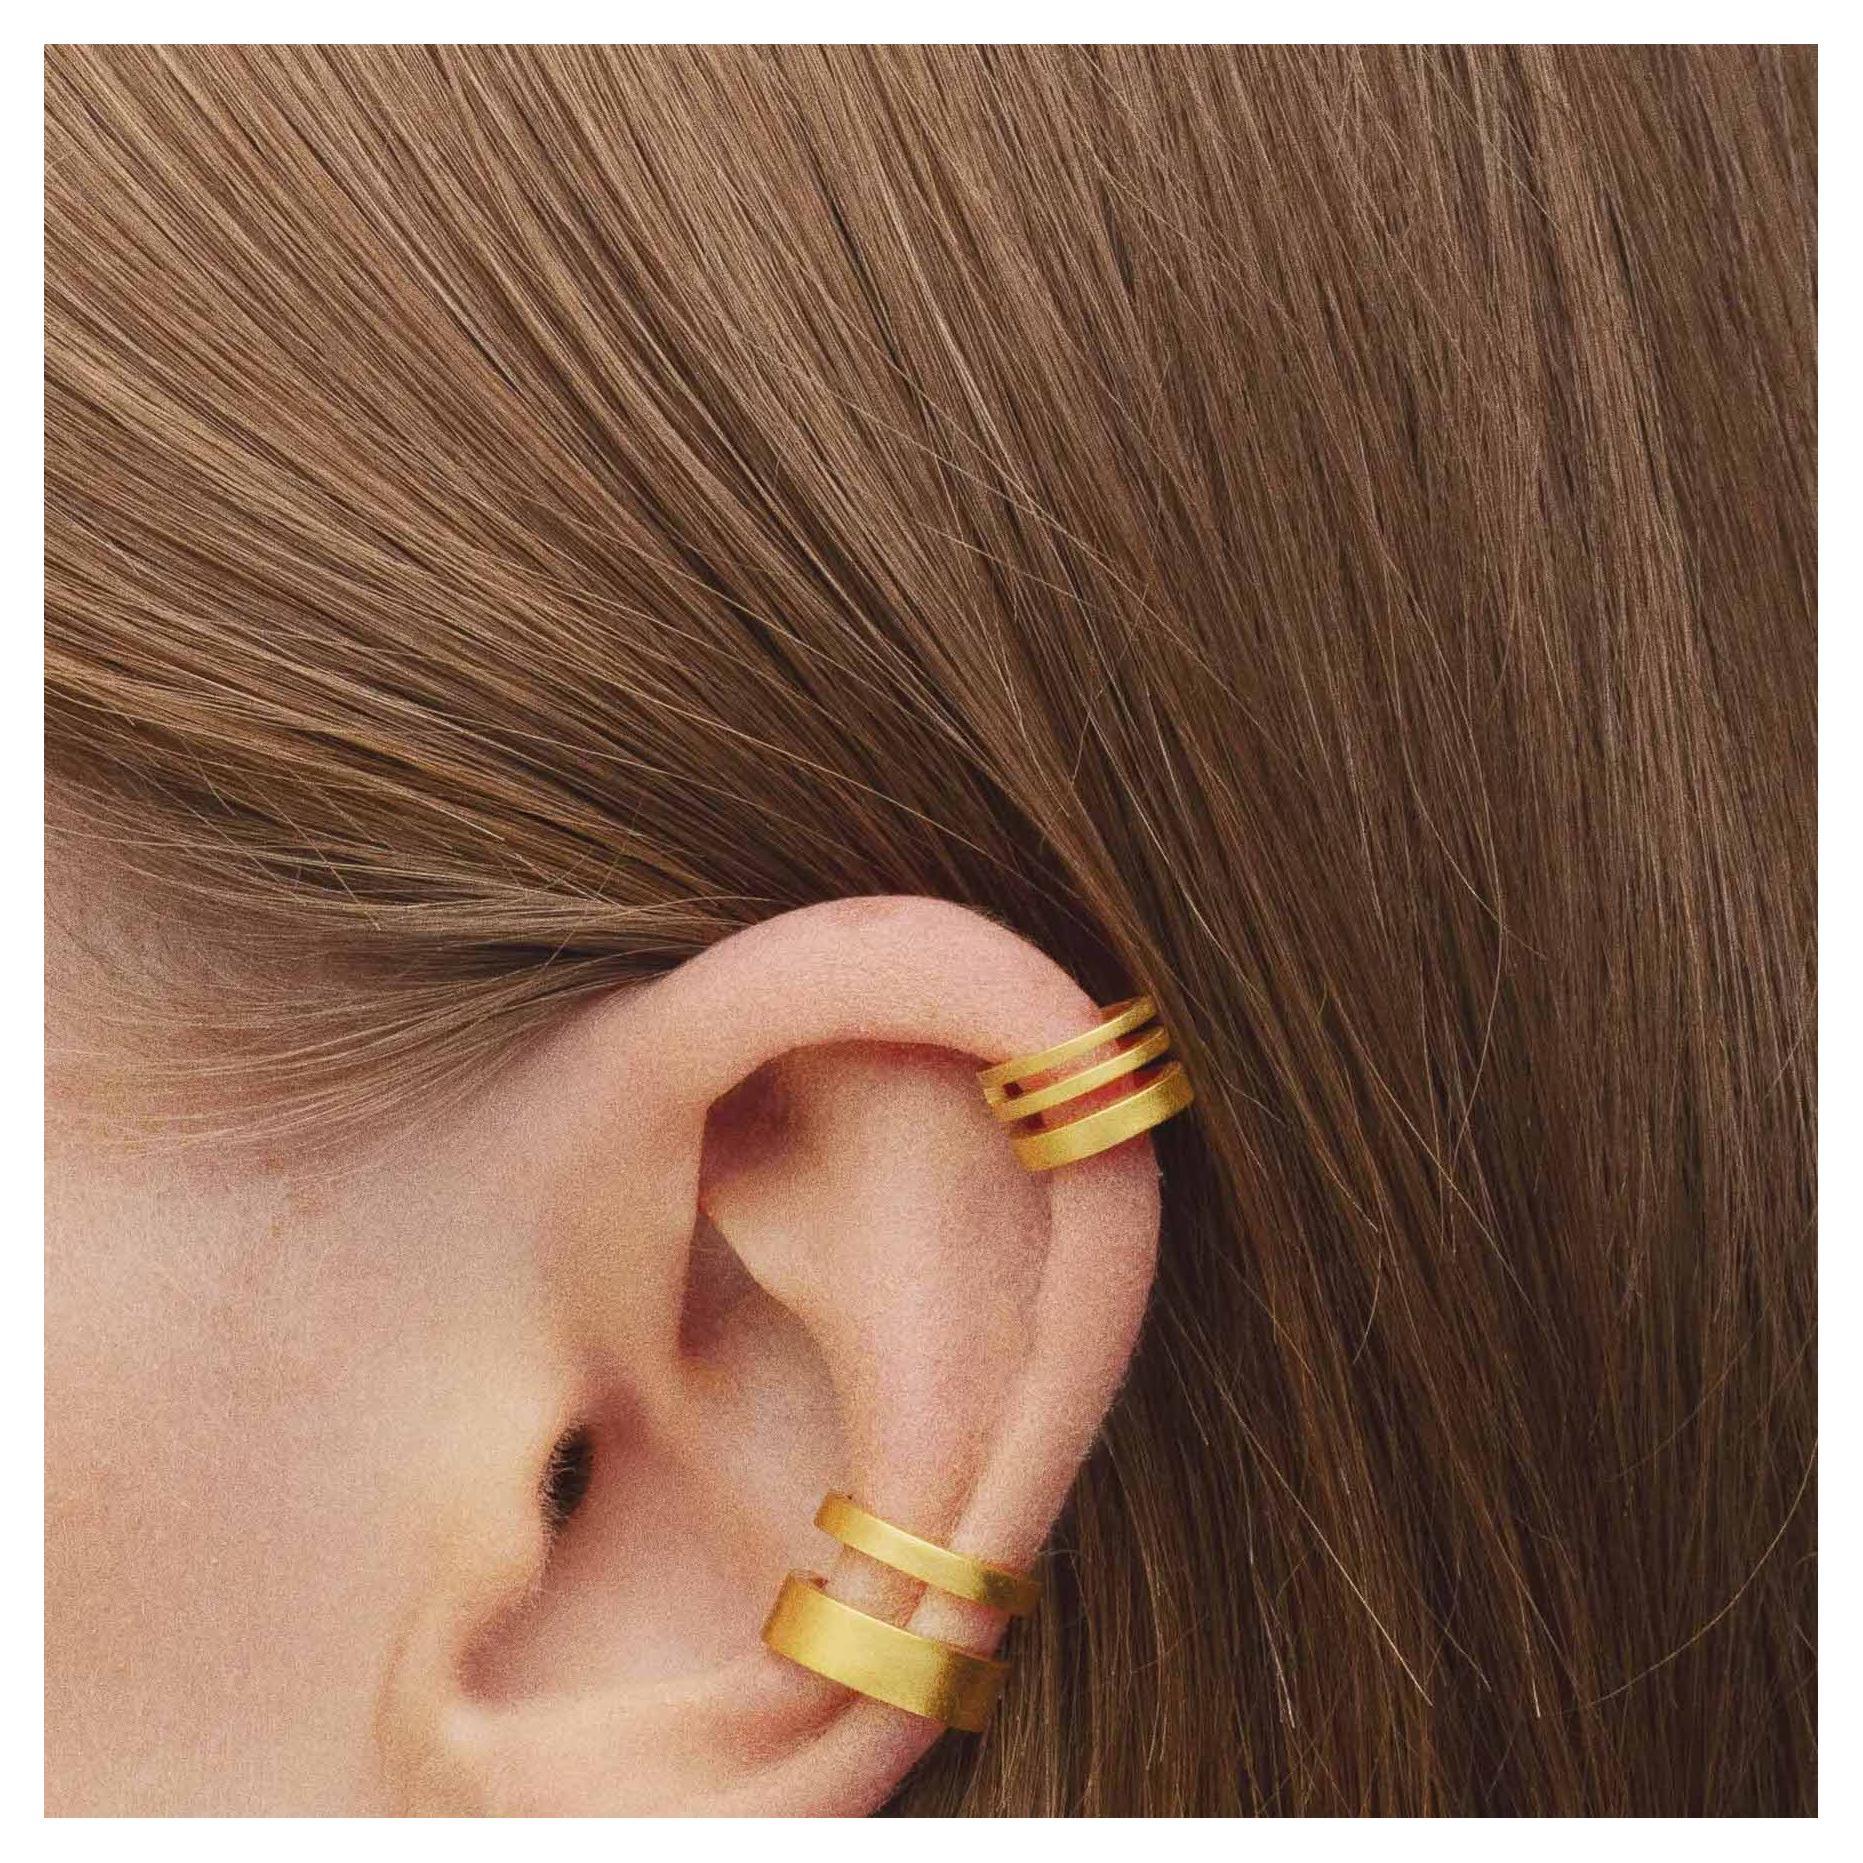 Unfinishing Line collection exudes minimalism and precision with its smooth lines and angles. Detail with a curved structure and cut out details.  Lines Ear cuff is perfect for day to night wear due to the simplistic neat design which can be paired